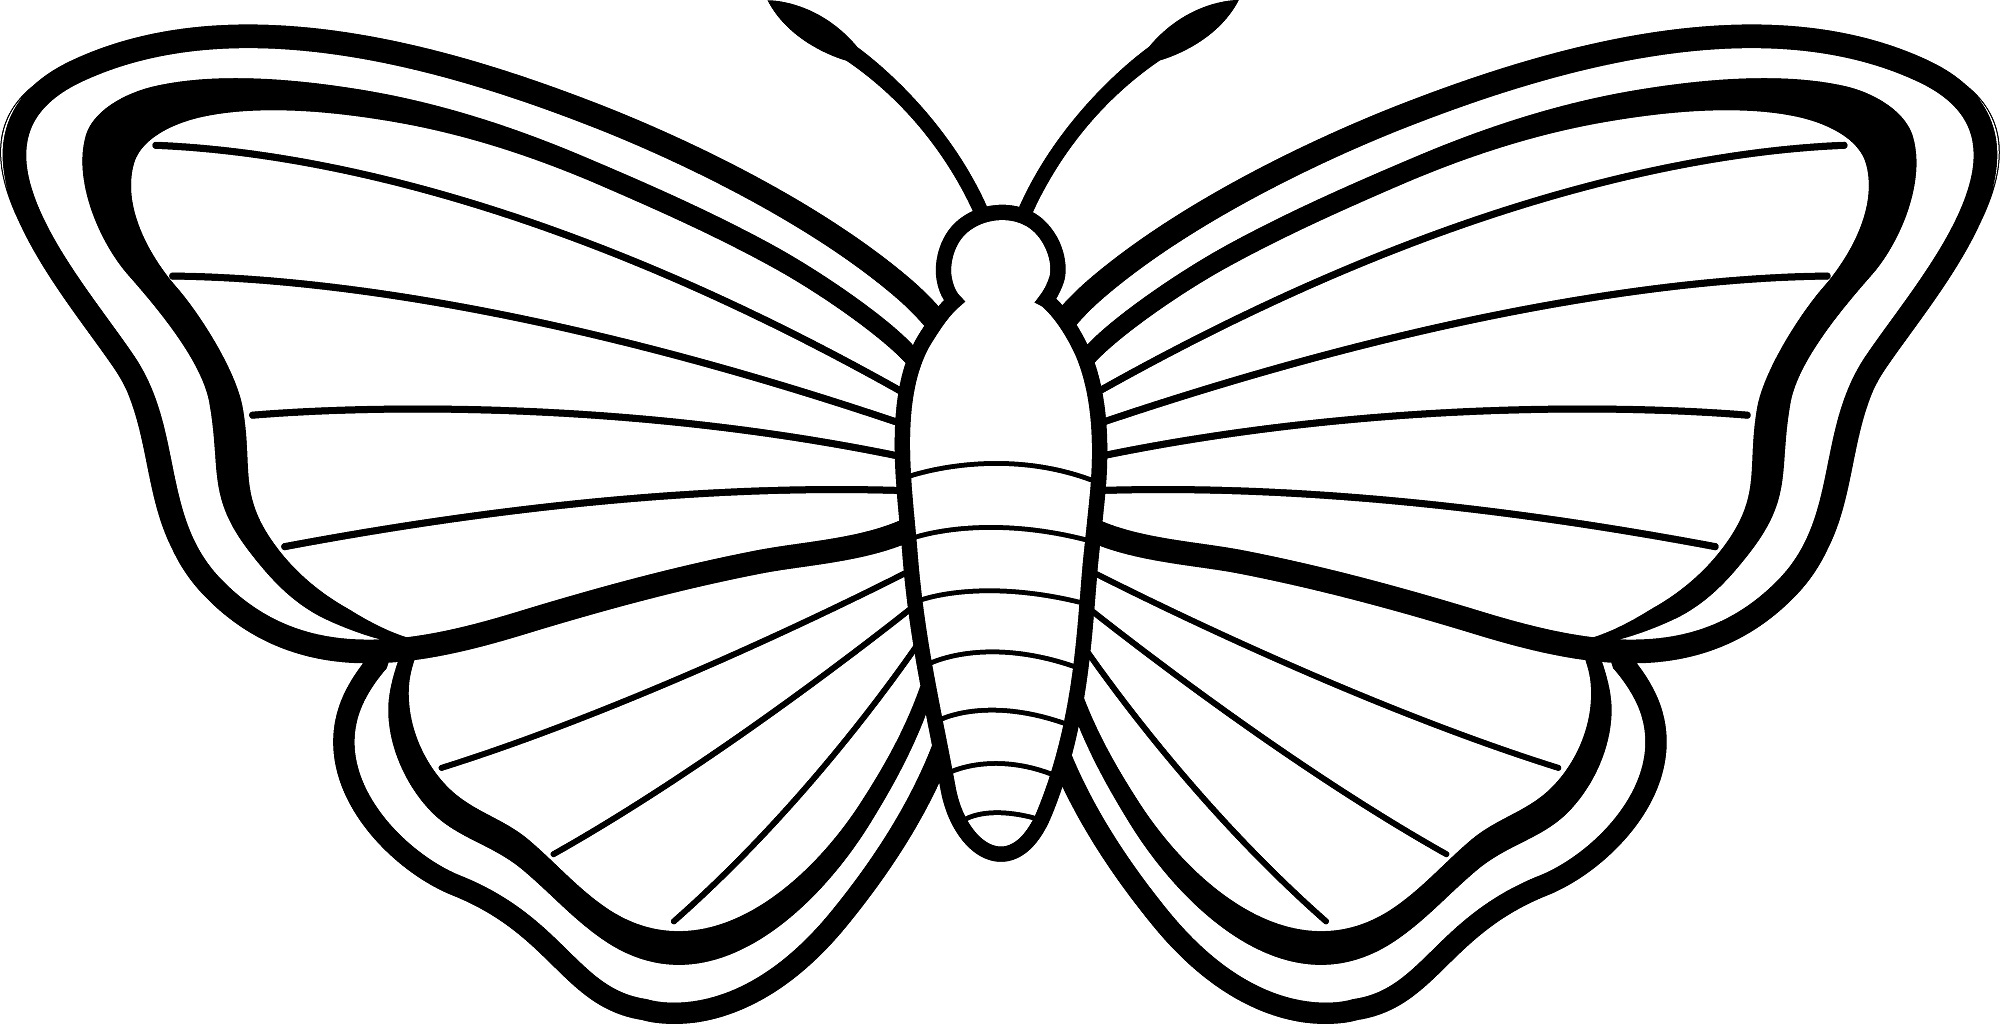 Cartoon Butterflies Coloring Pages Coloring Books Coloring Books Free Butterfly Pictures To Color